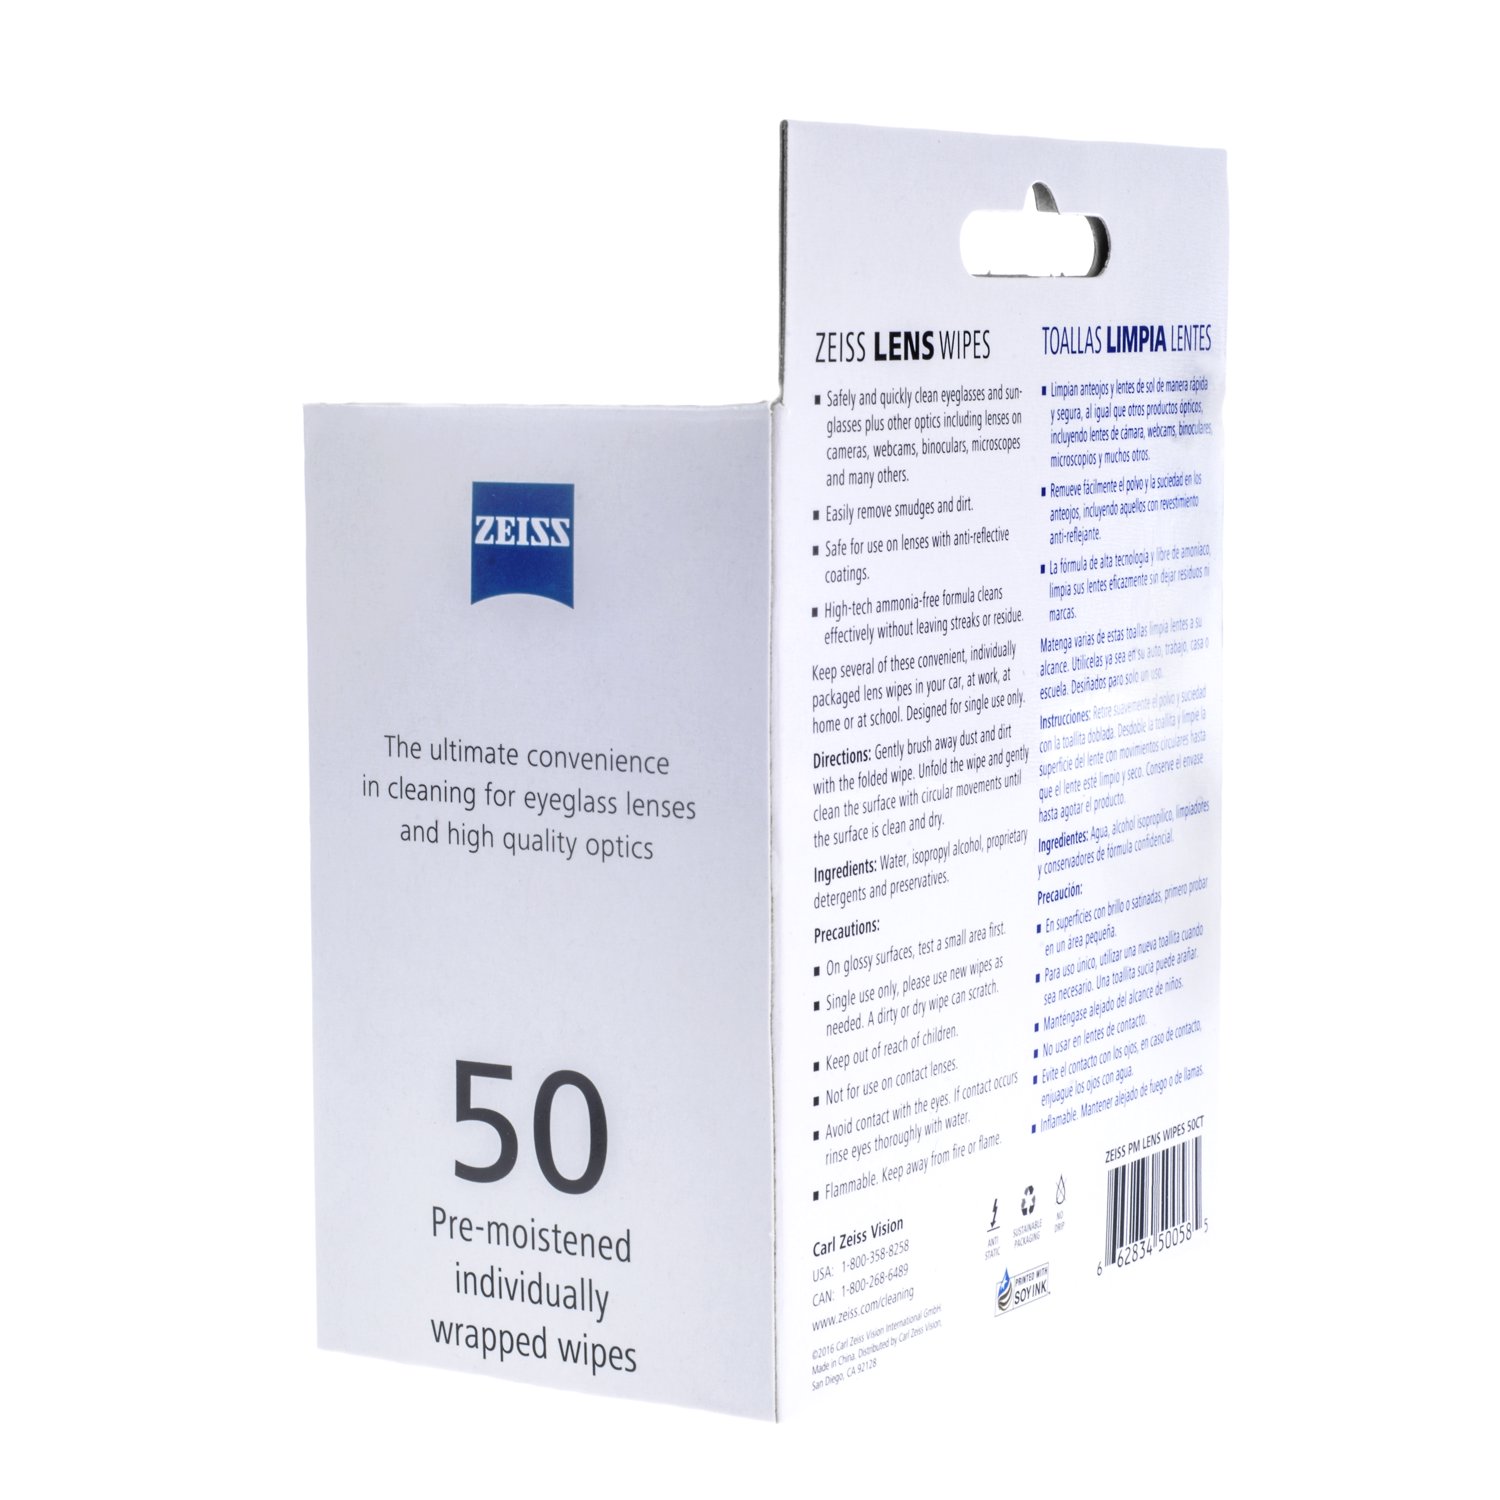 ZEISS Gentle and Thorough Cleaning Eyeglass Lens Cleaner Wipes, 50 Count - image 5 of 6